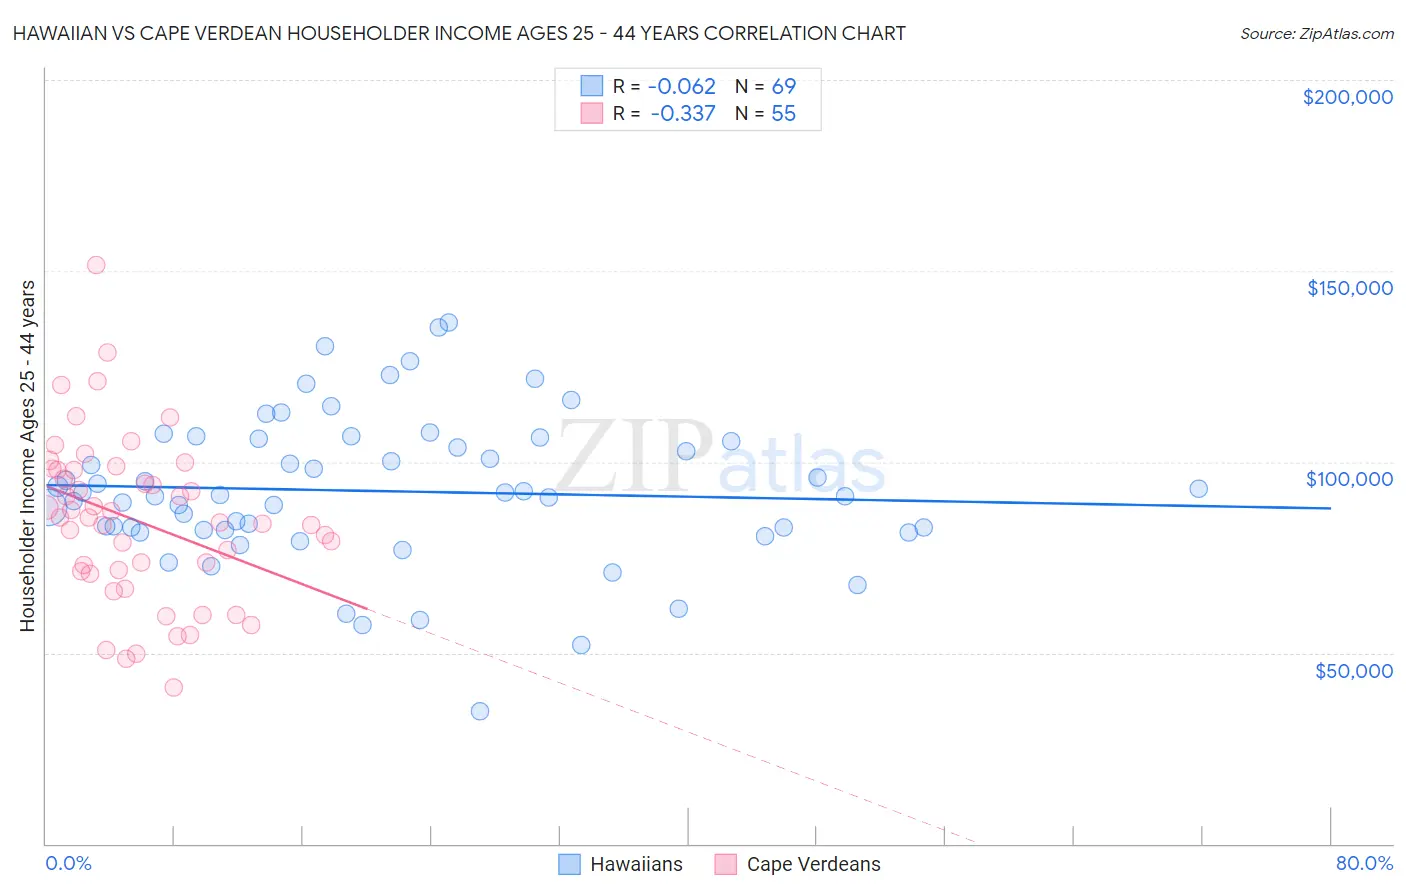 Hawaiian vs Cape Verdean Householder Income Ages 25 - 44 years